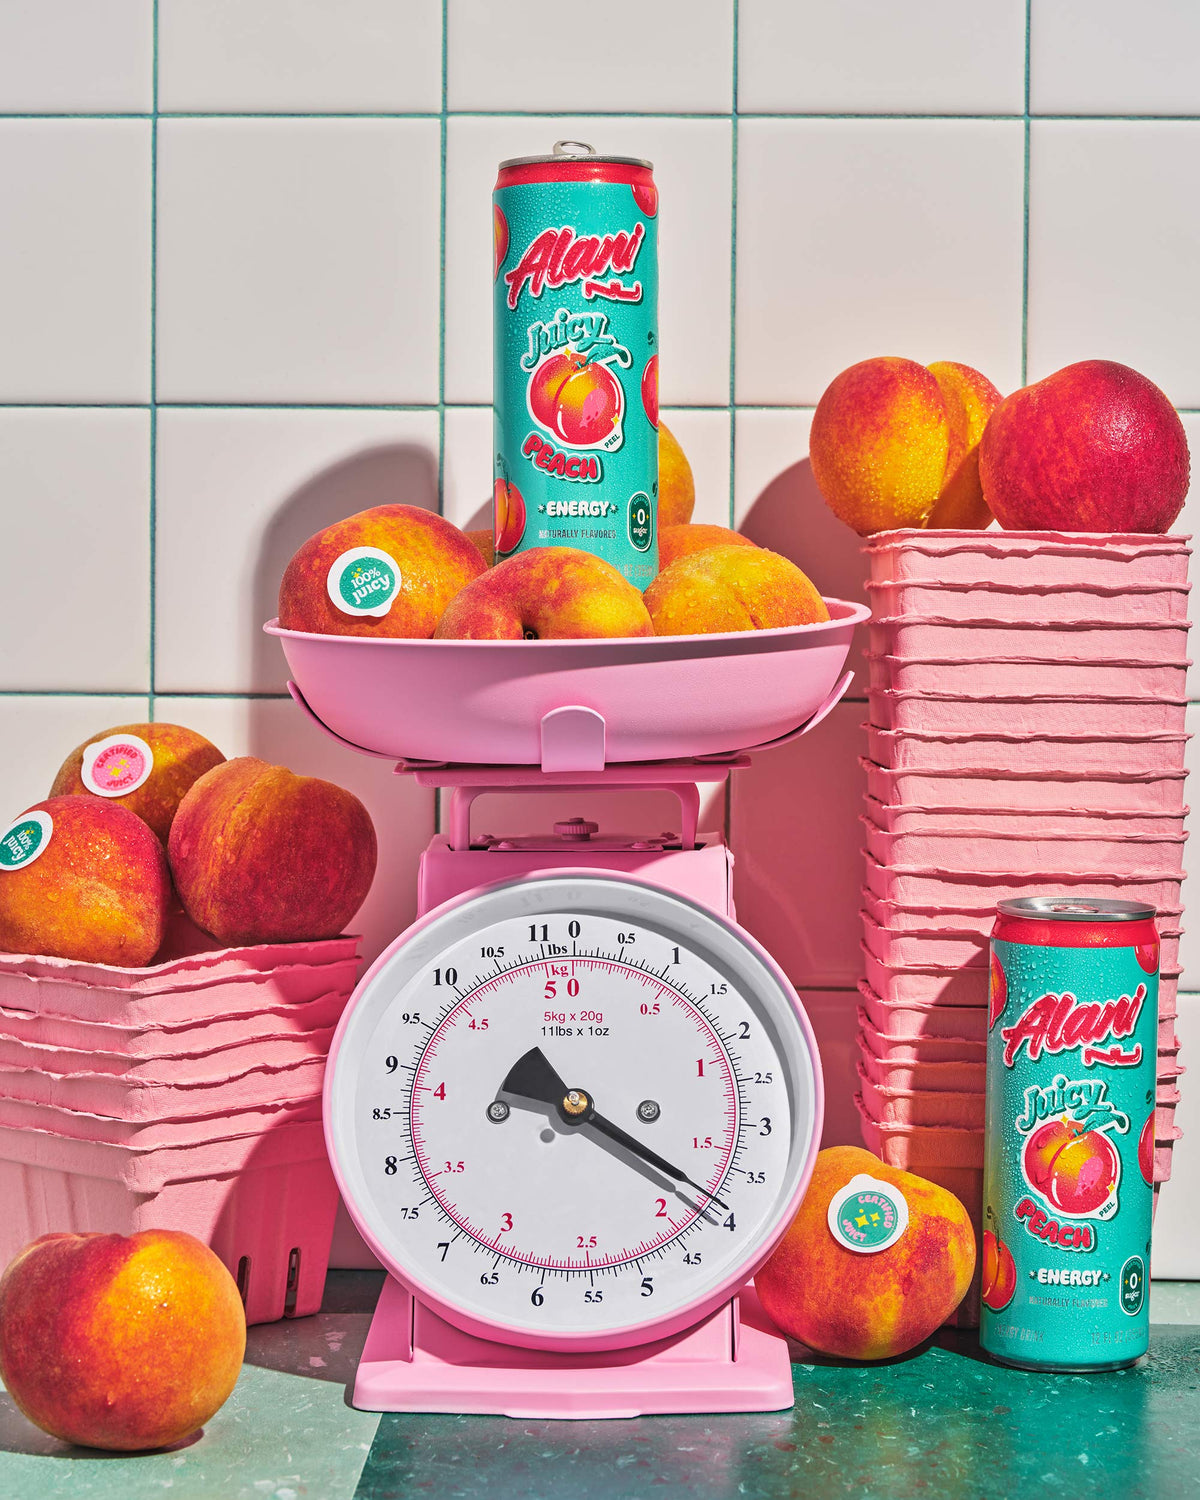 A pink food scale weighing a can of Energy Drink in Juicy Peach flavor next to peaches.